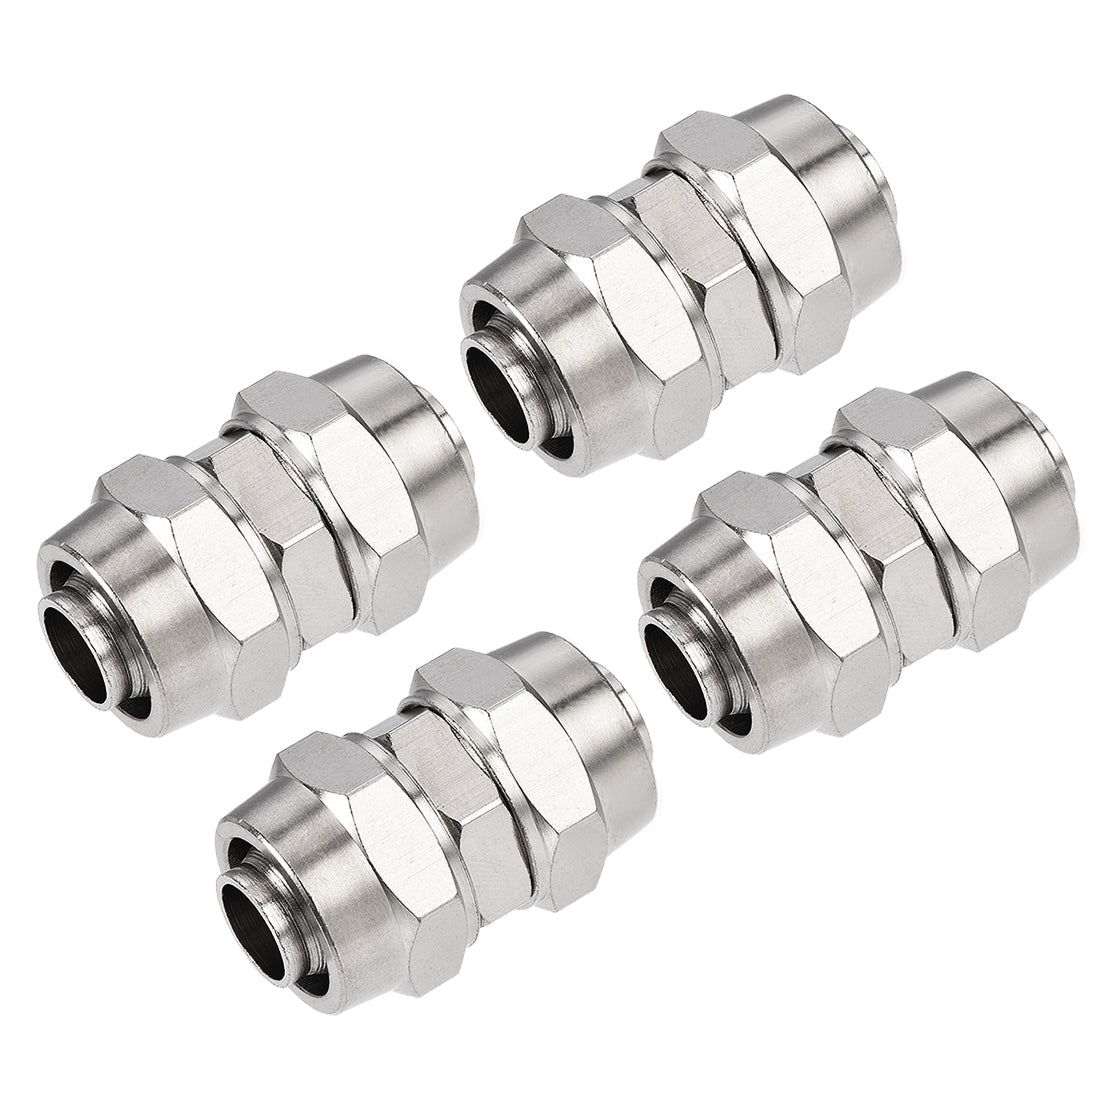 uxcell Uxcell Compression Tube Fitting Nickel Plating for 12mm Pneumatic Hose Tube 4pcs